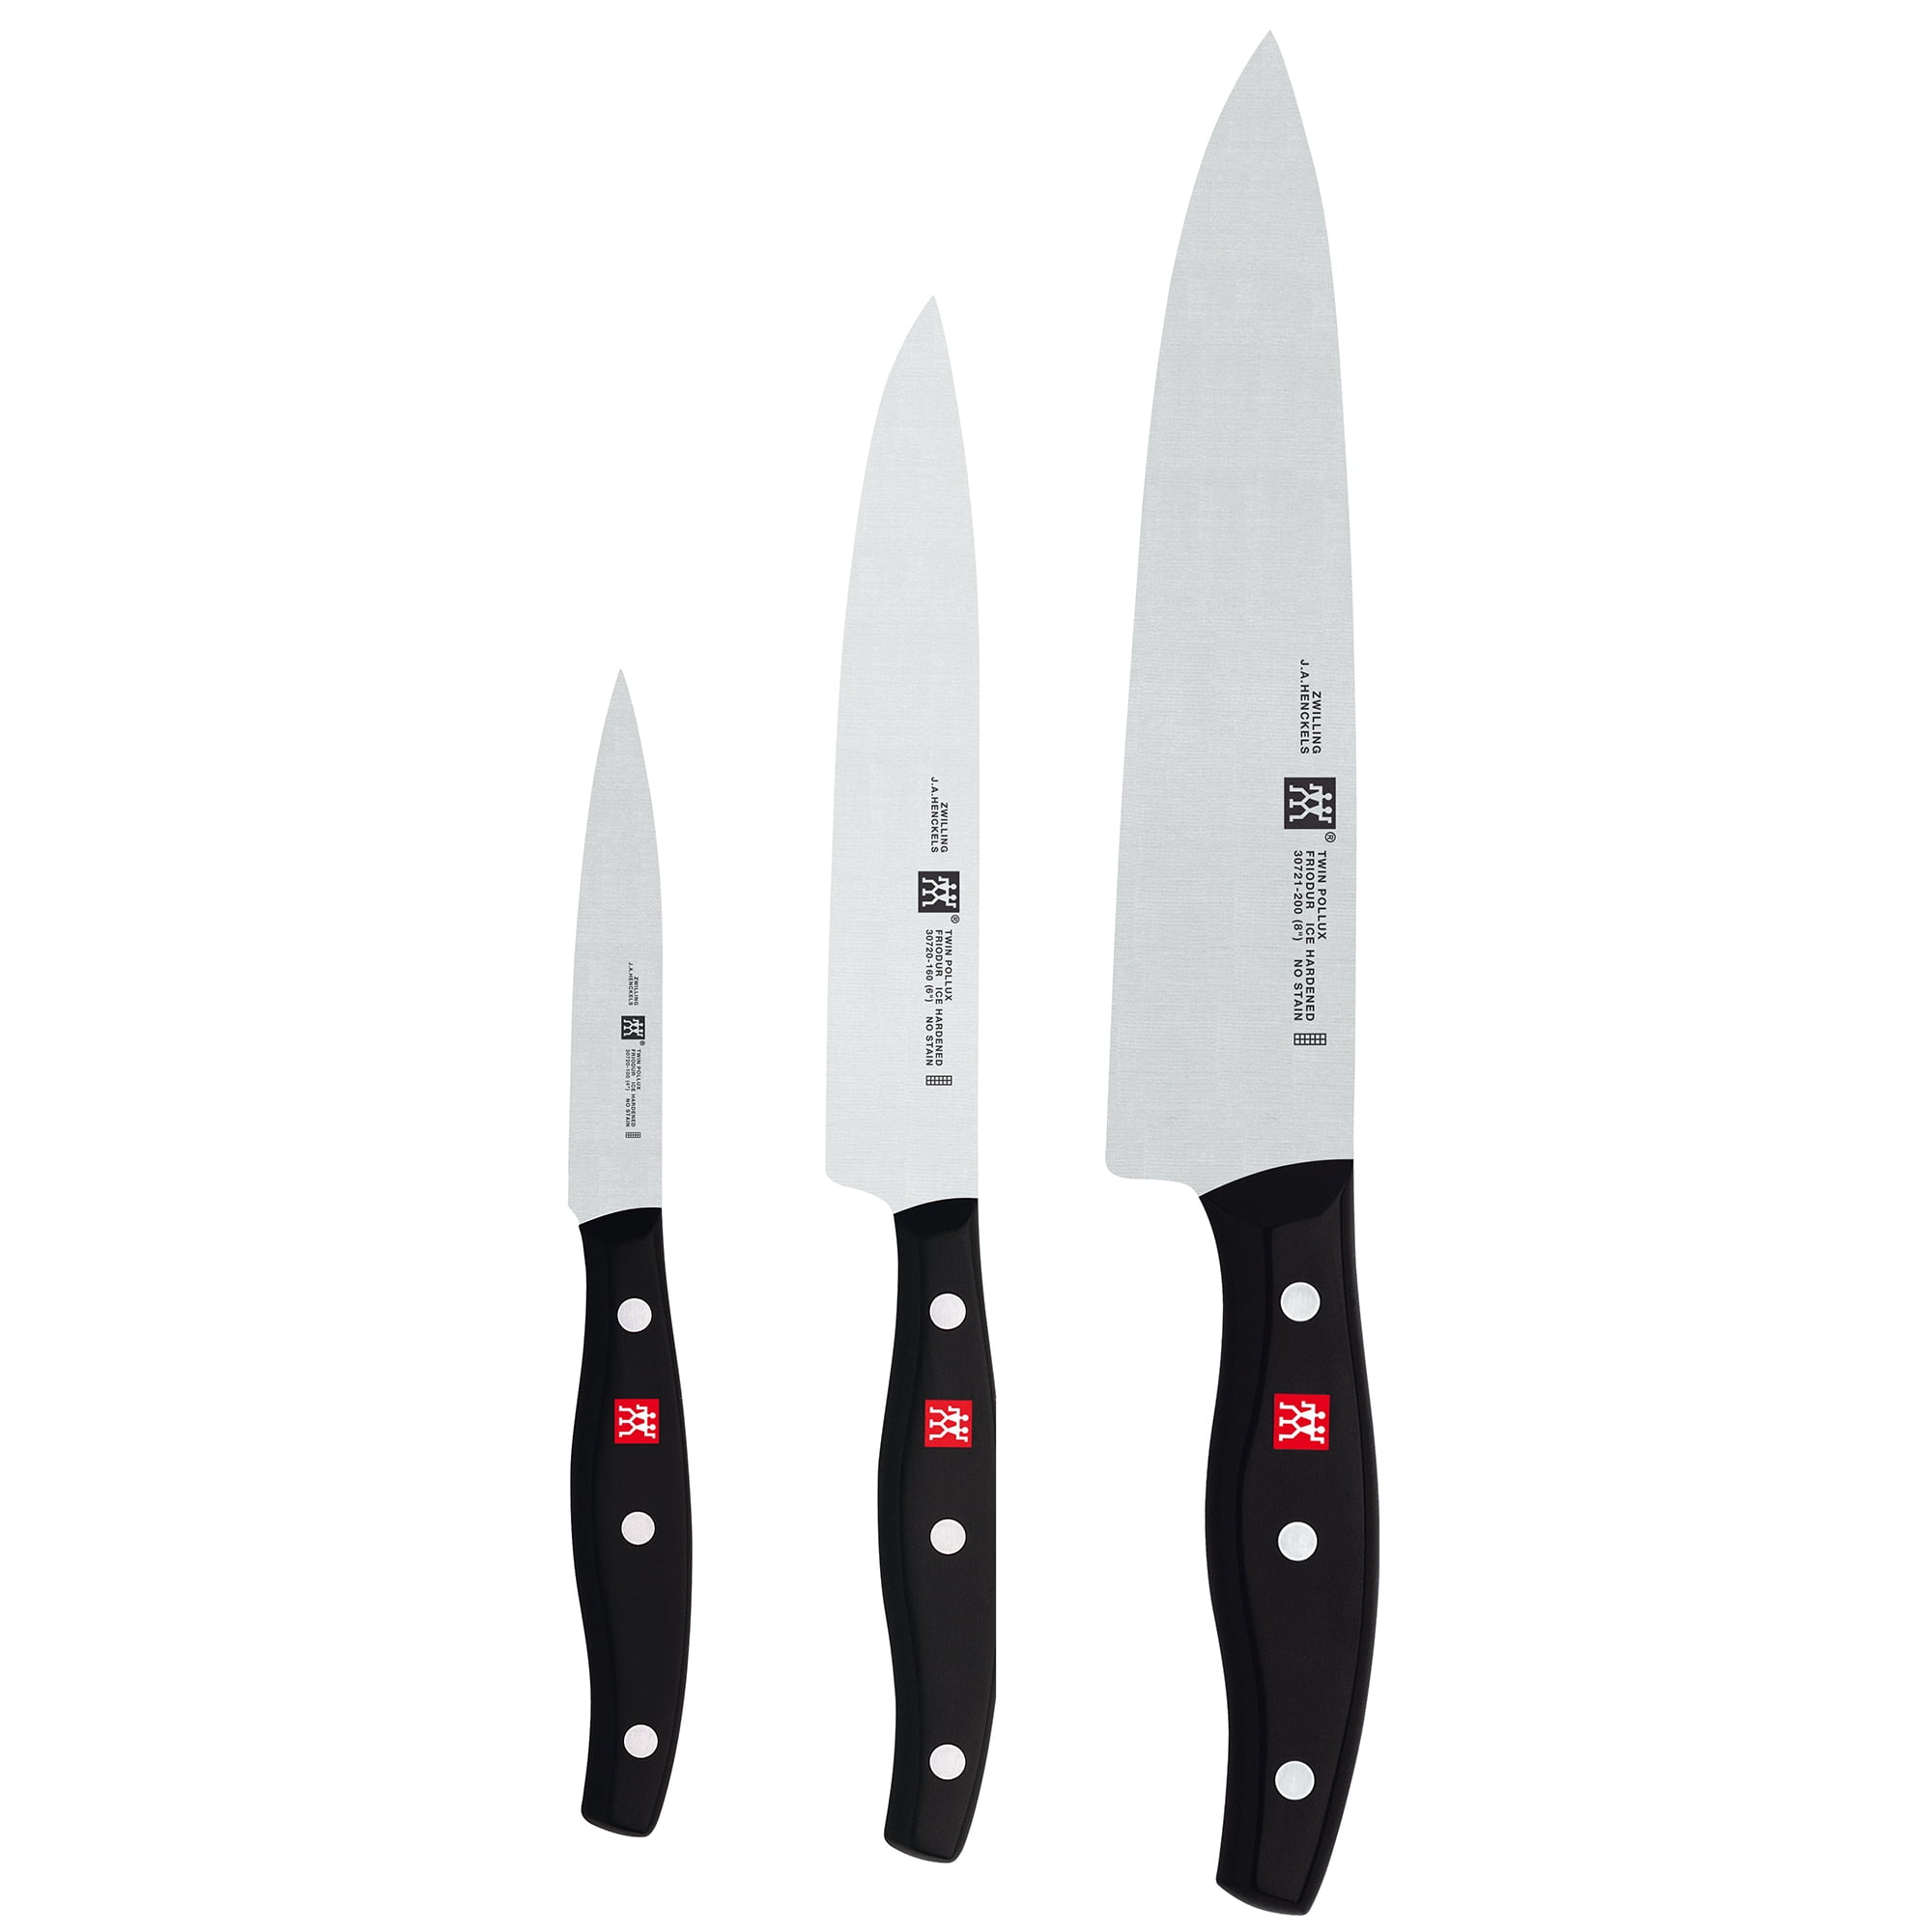 Zwilling J.A. Henckels TWIN Pure Gadgets Multi-Grater Set - KnifeCenter -  37523-000 - Discontinued